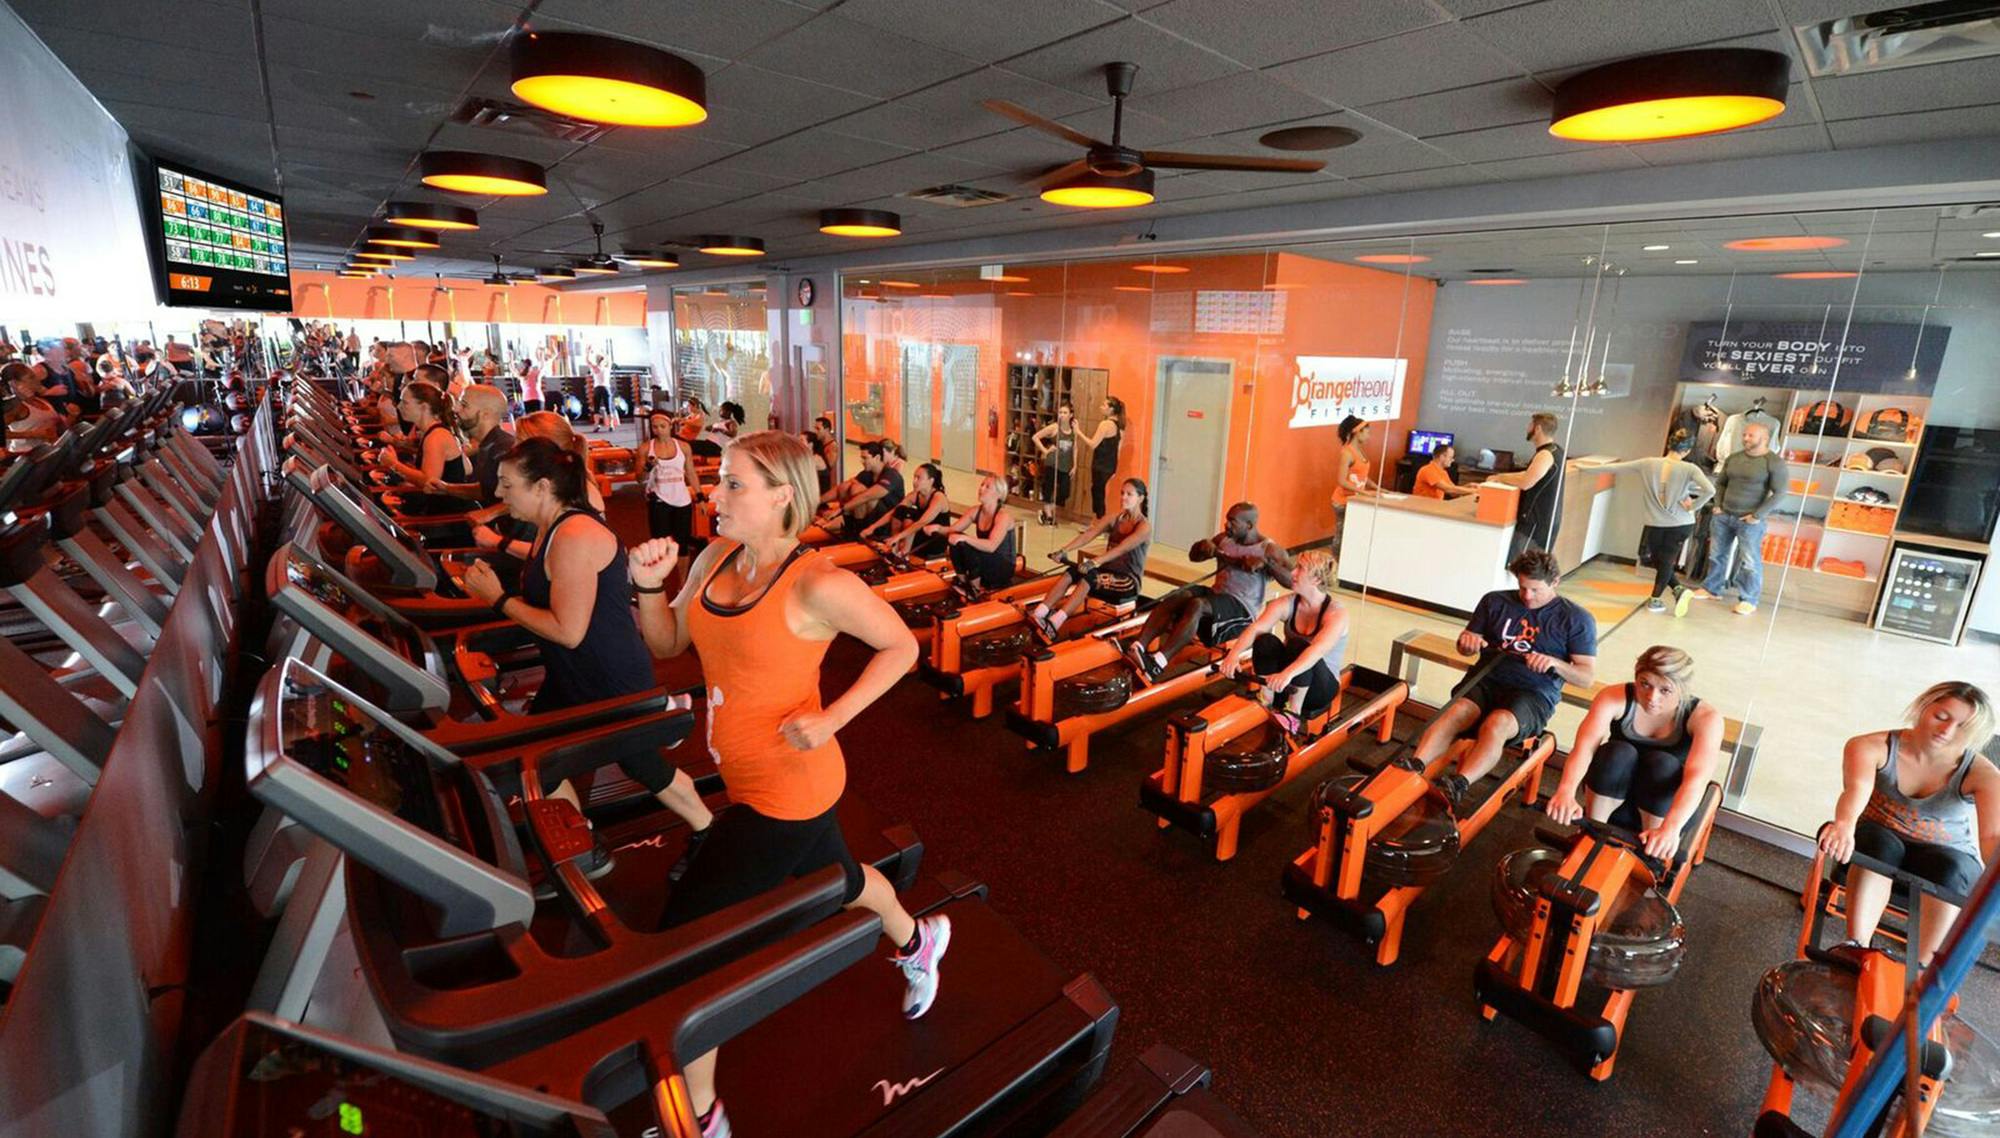 Orangetheory Price and Other Info to Know Before Signing Up